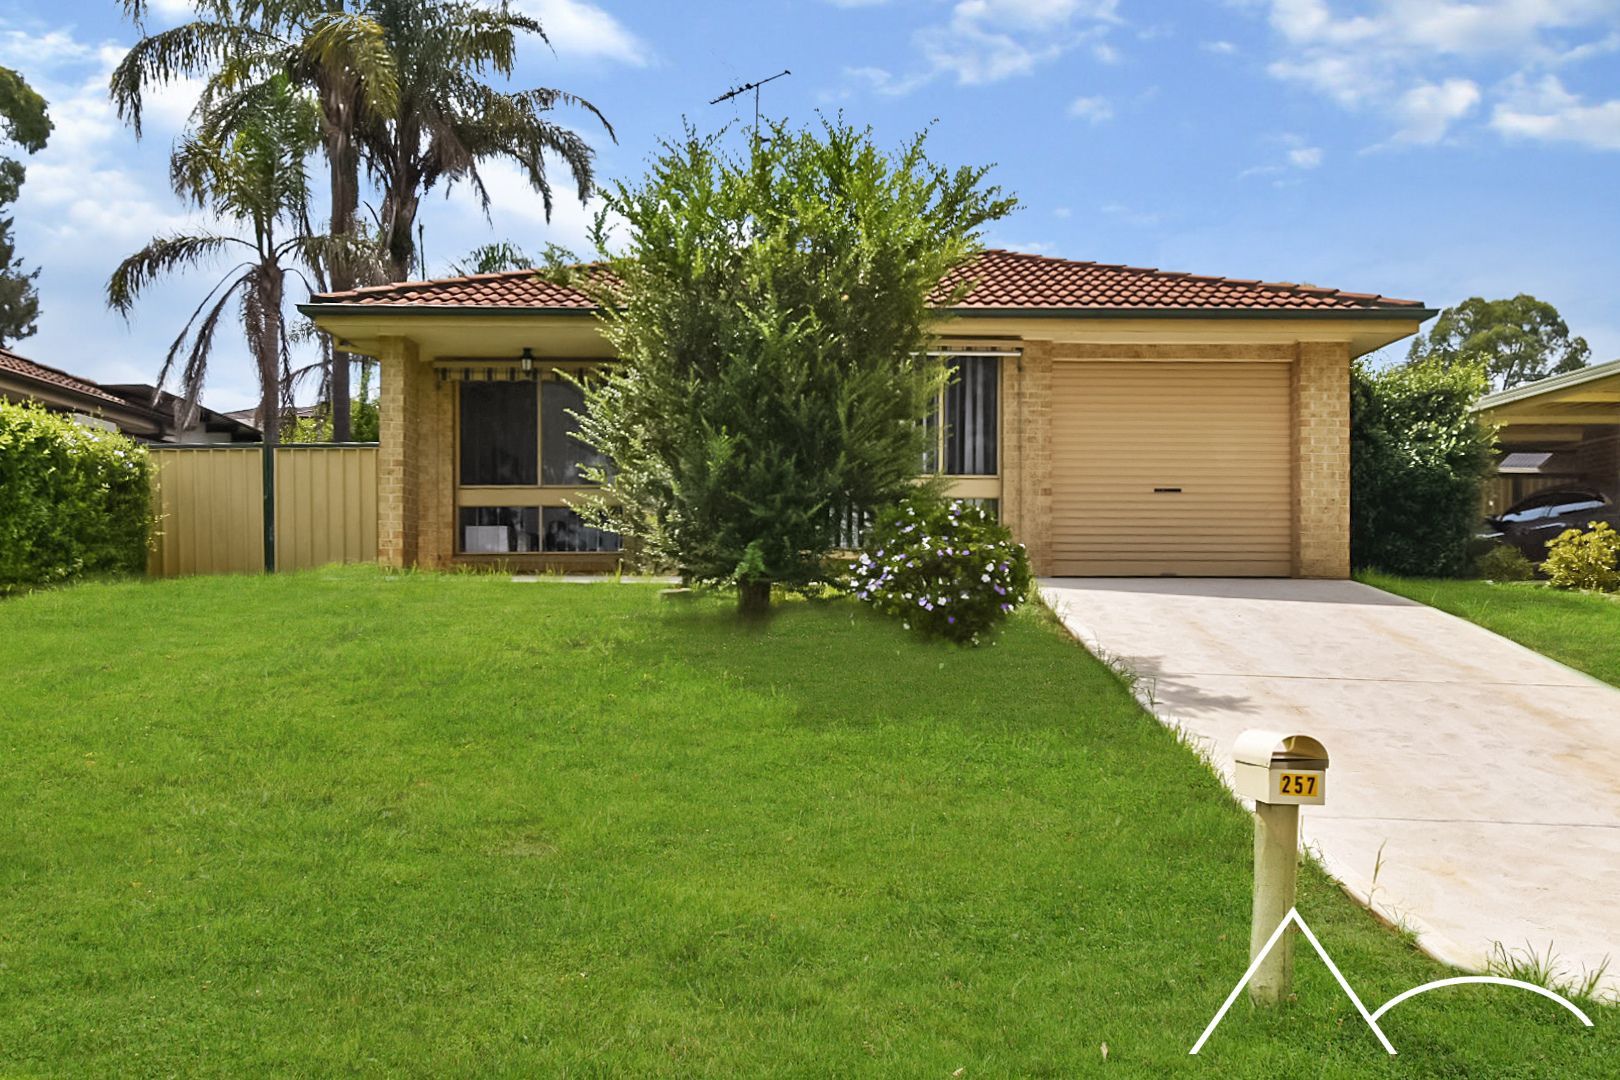 4 bedrooms House in 257 Welling Drive MOUNT ANNAN NSW, 2567